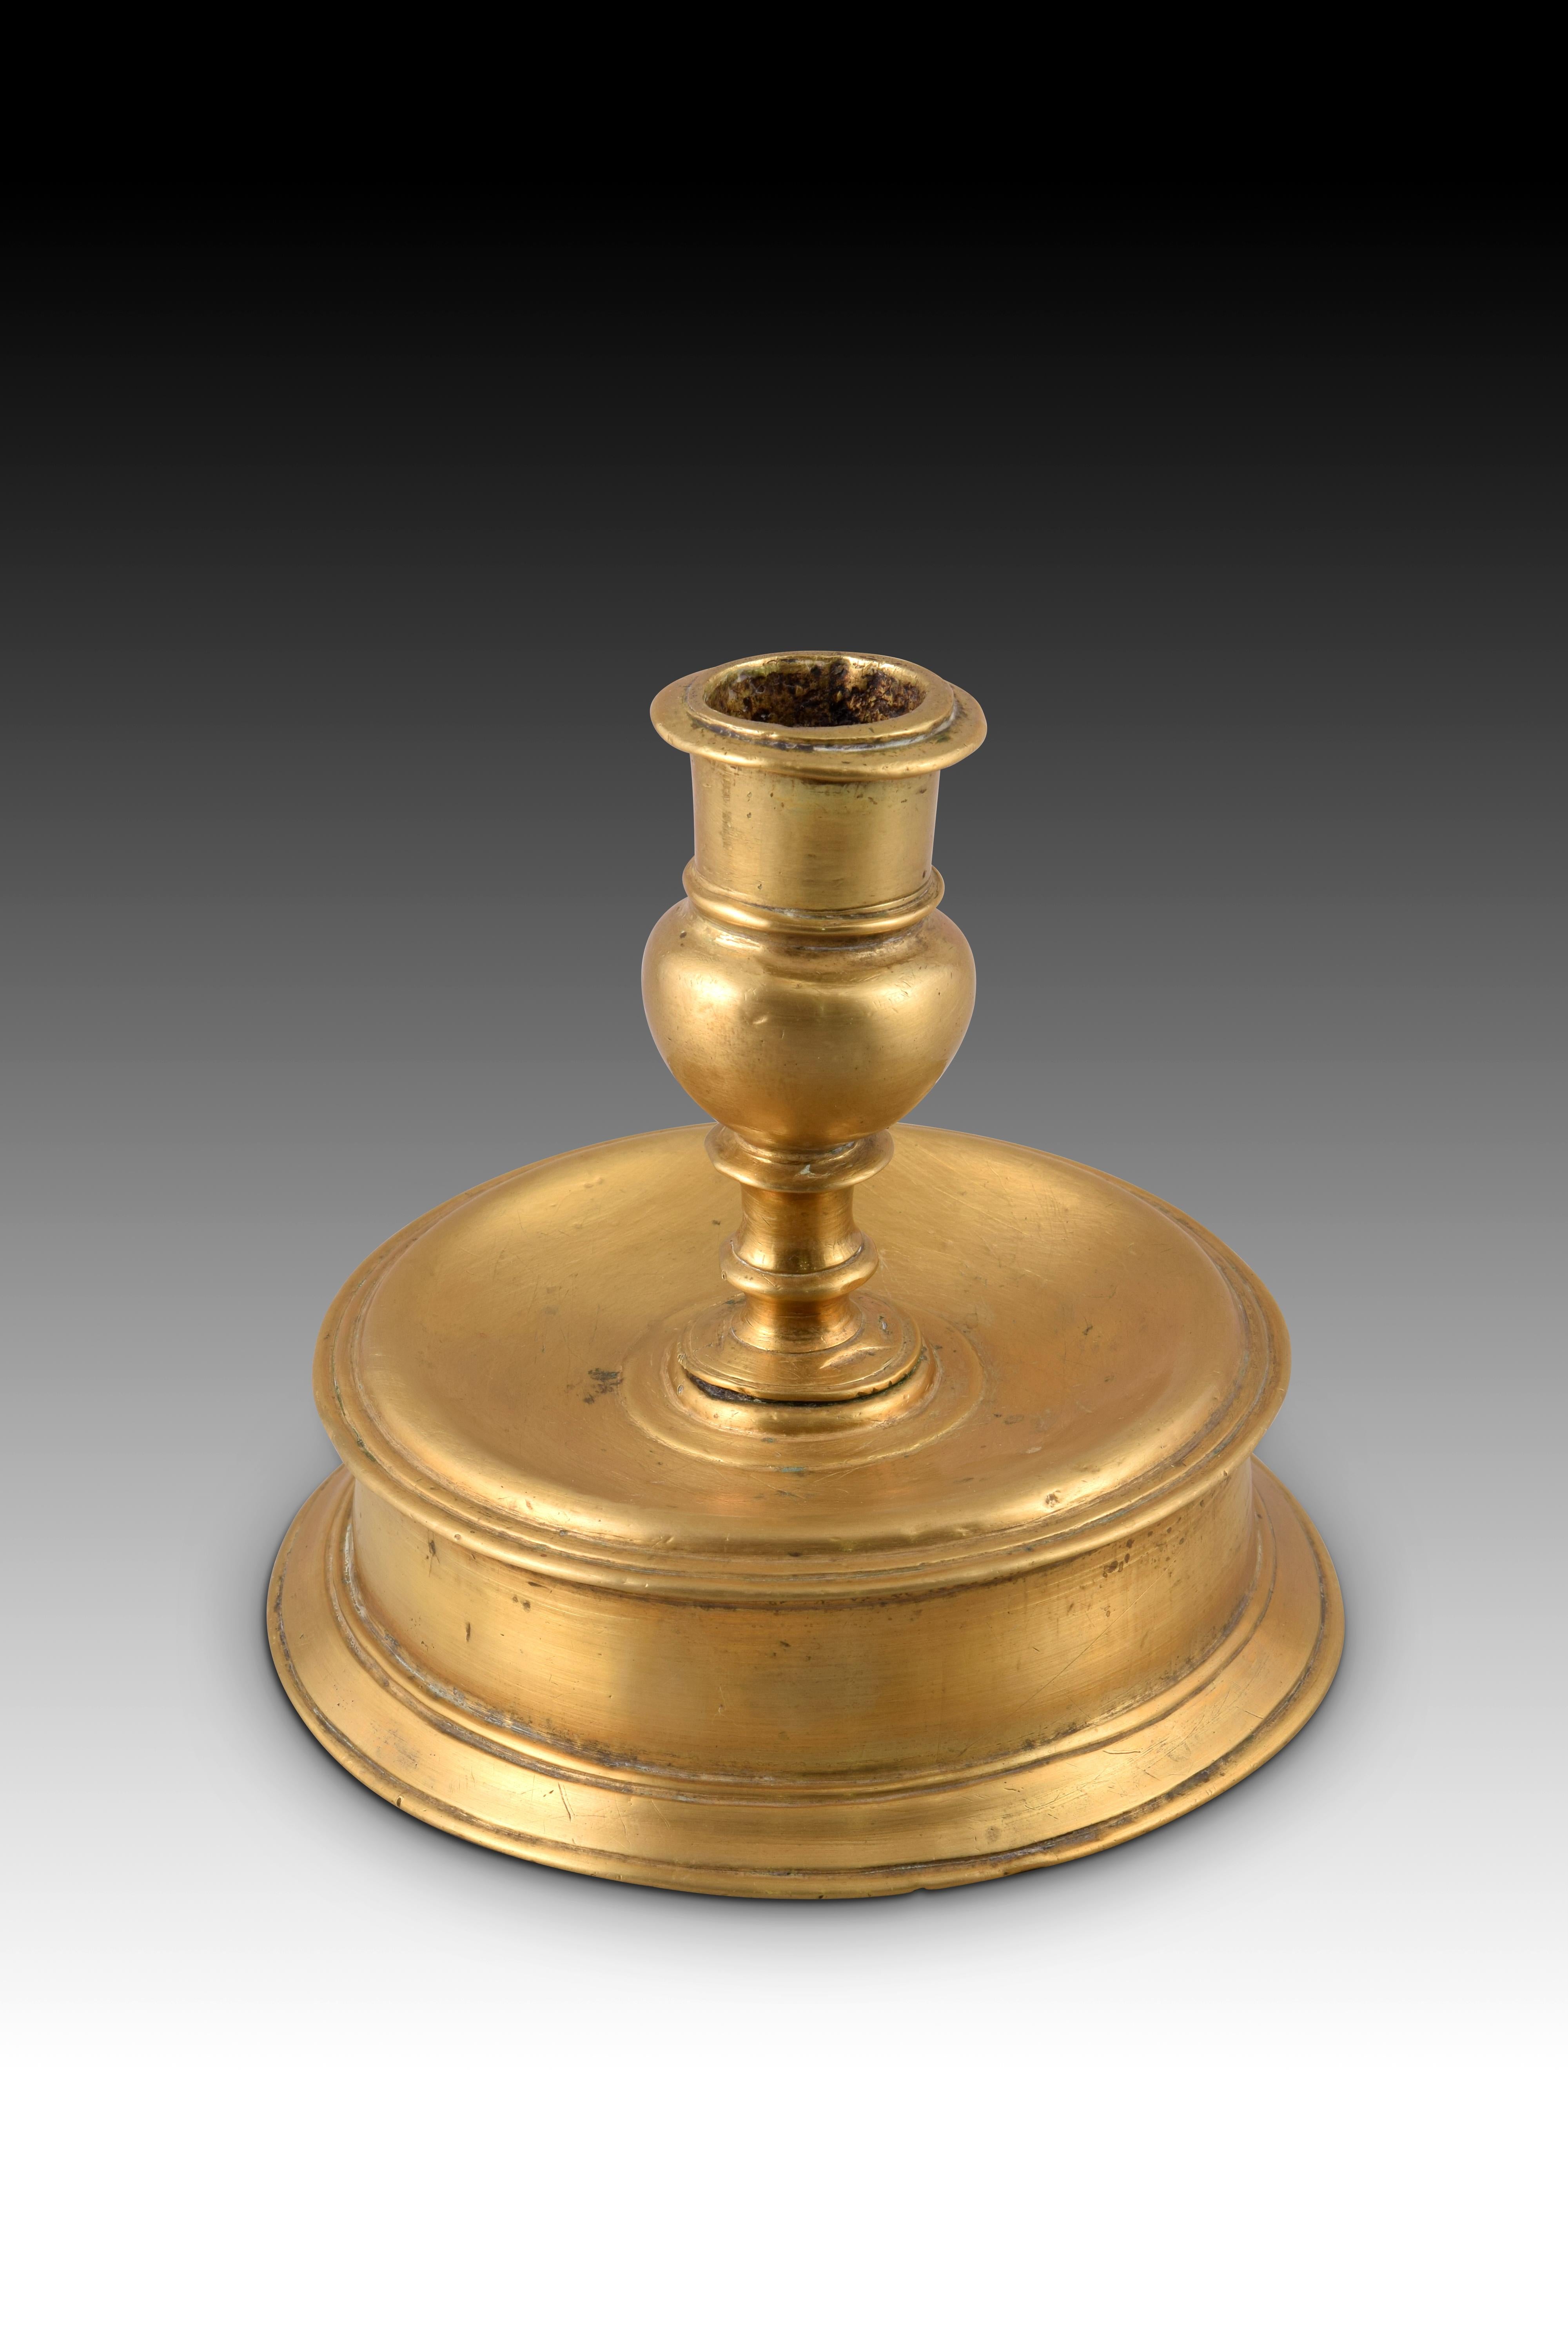 Reel candlestick, bronze, century XVI. 
Candlestick of the type known as 